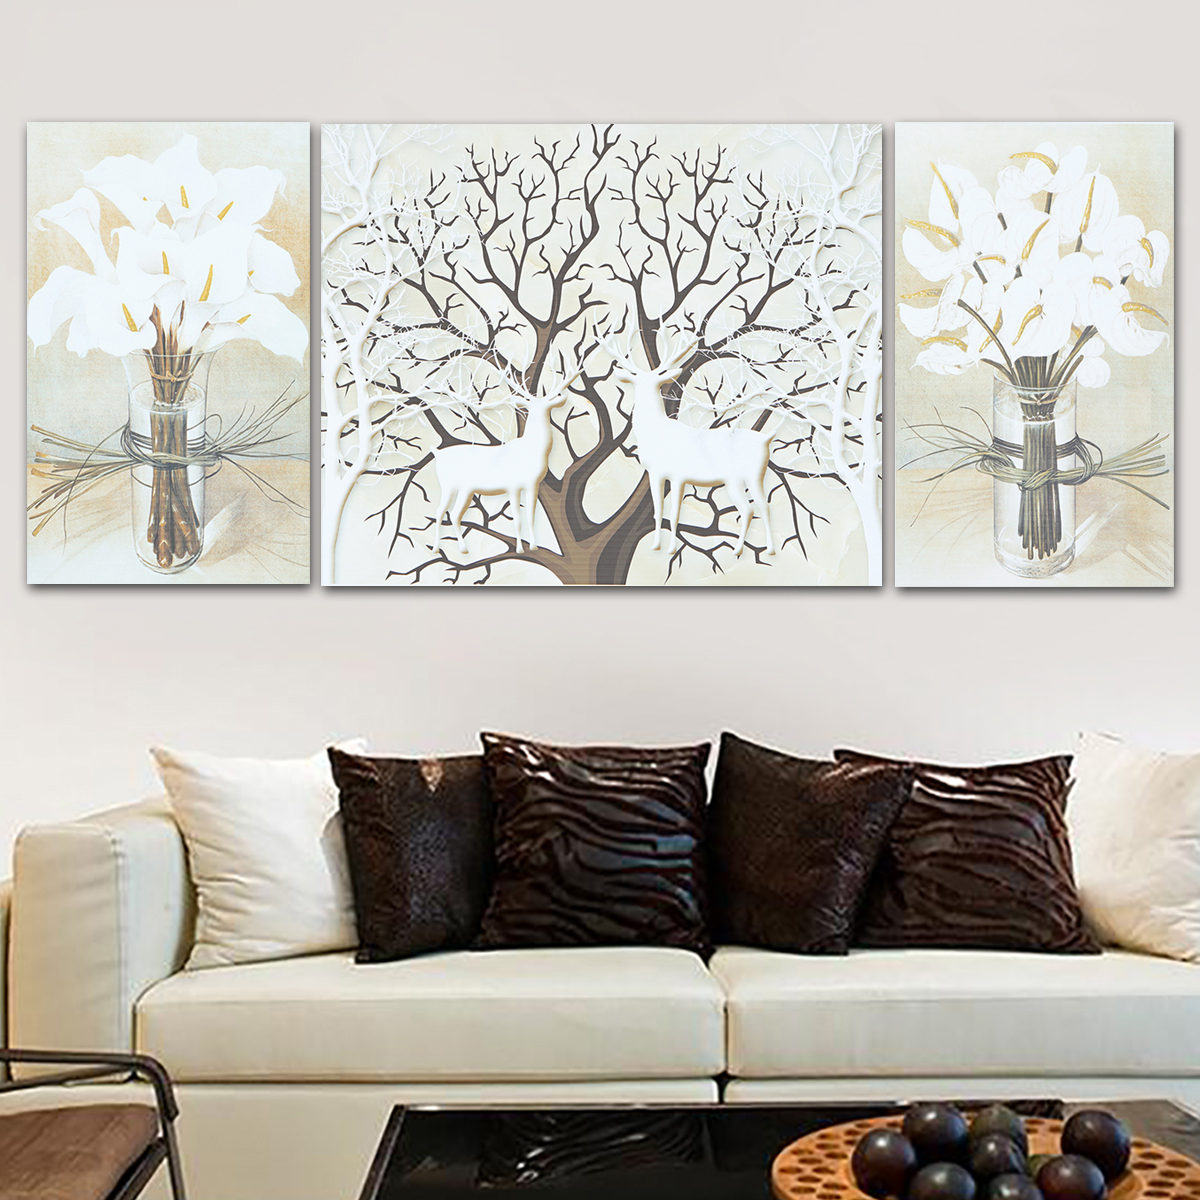 3PCS-Deer-Modern-Canvas-Print-Paintings-Wall-Art-Pictures-Home-Decoration-Unframed-1432216